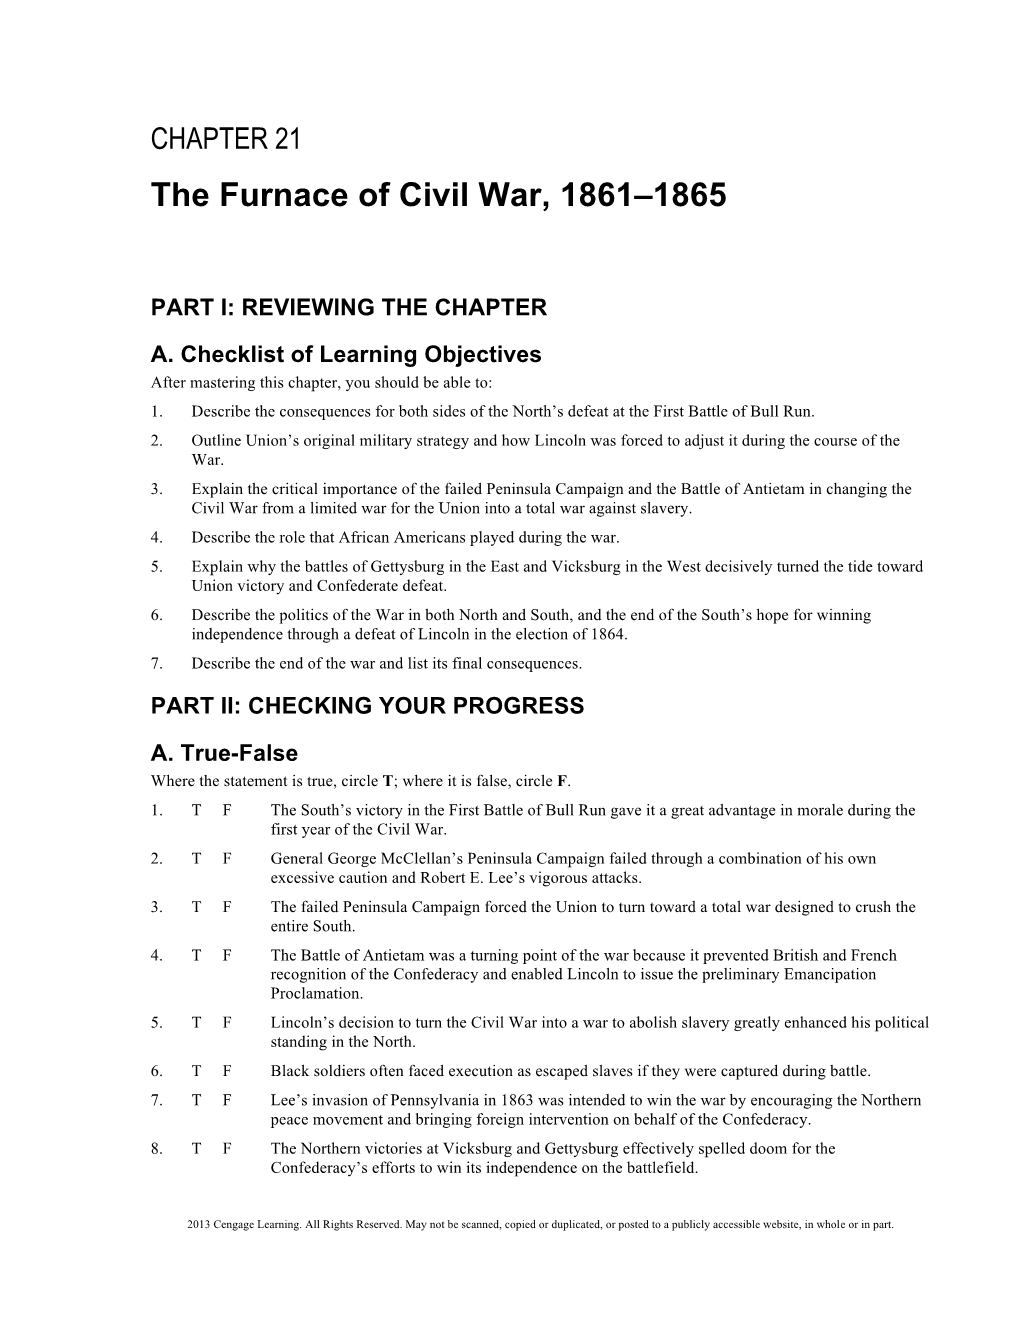 CHAPTER 21 the Furnace of Civil War, 1861–1865